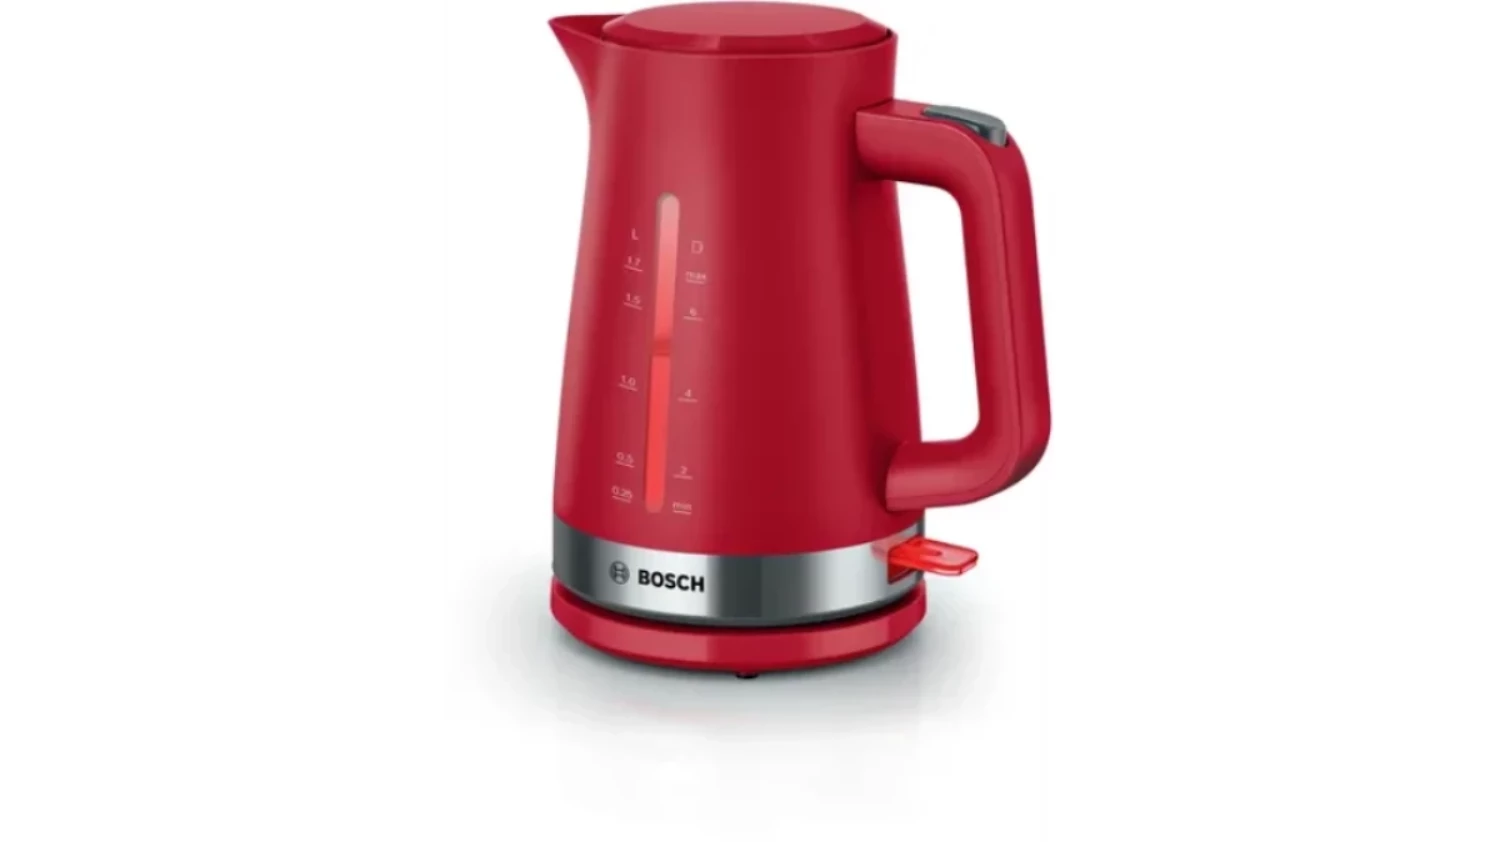 BOSCH KETTLE CORDLESS RED